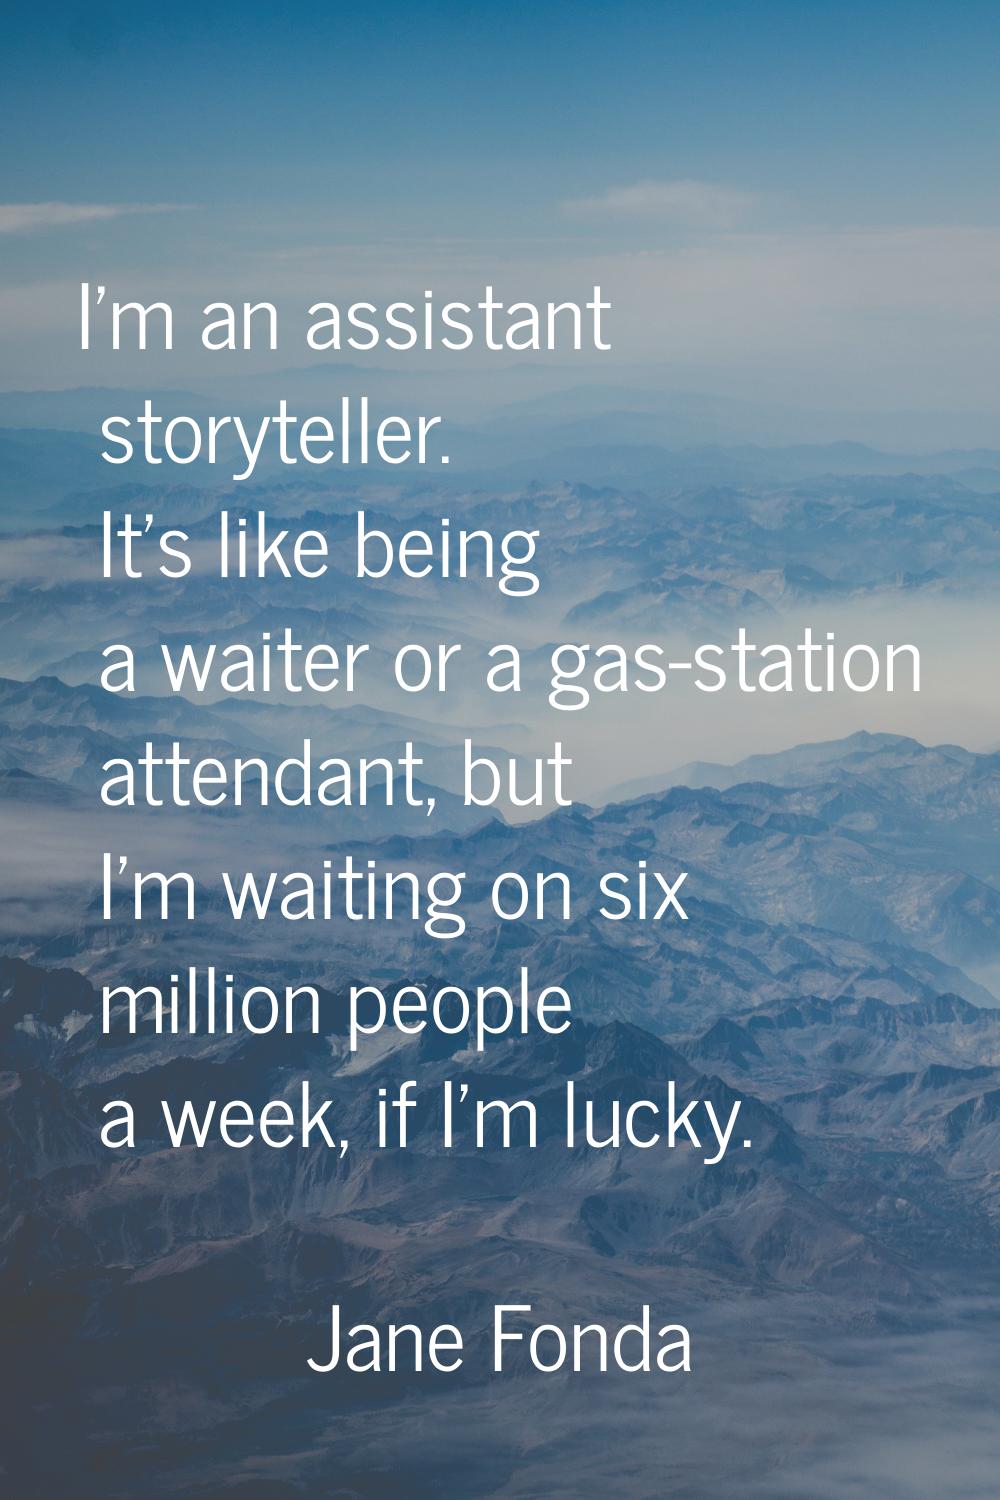 I'm an assistant storyteller. It's like being a waiter or a gas-station attendant, but I'm waiting 